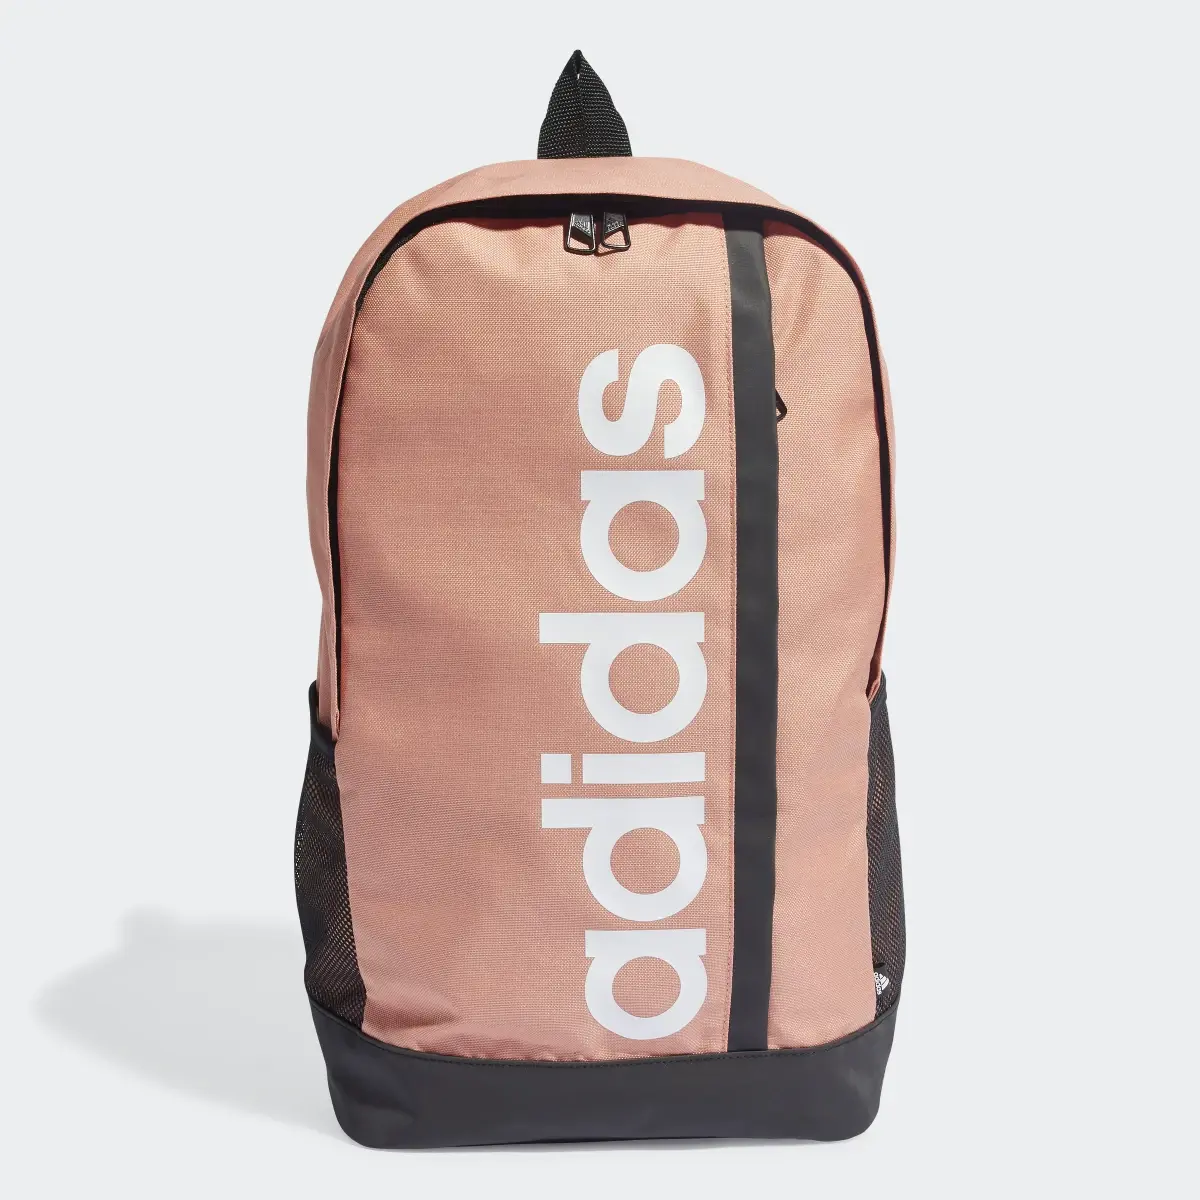 Adidas Essentials Linear Backpack. 1